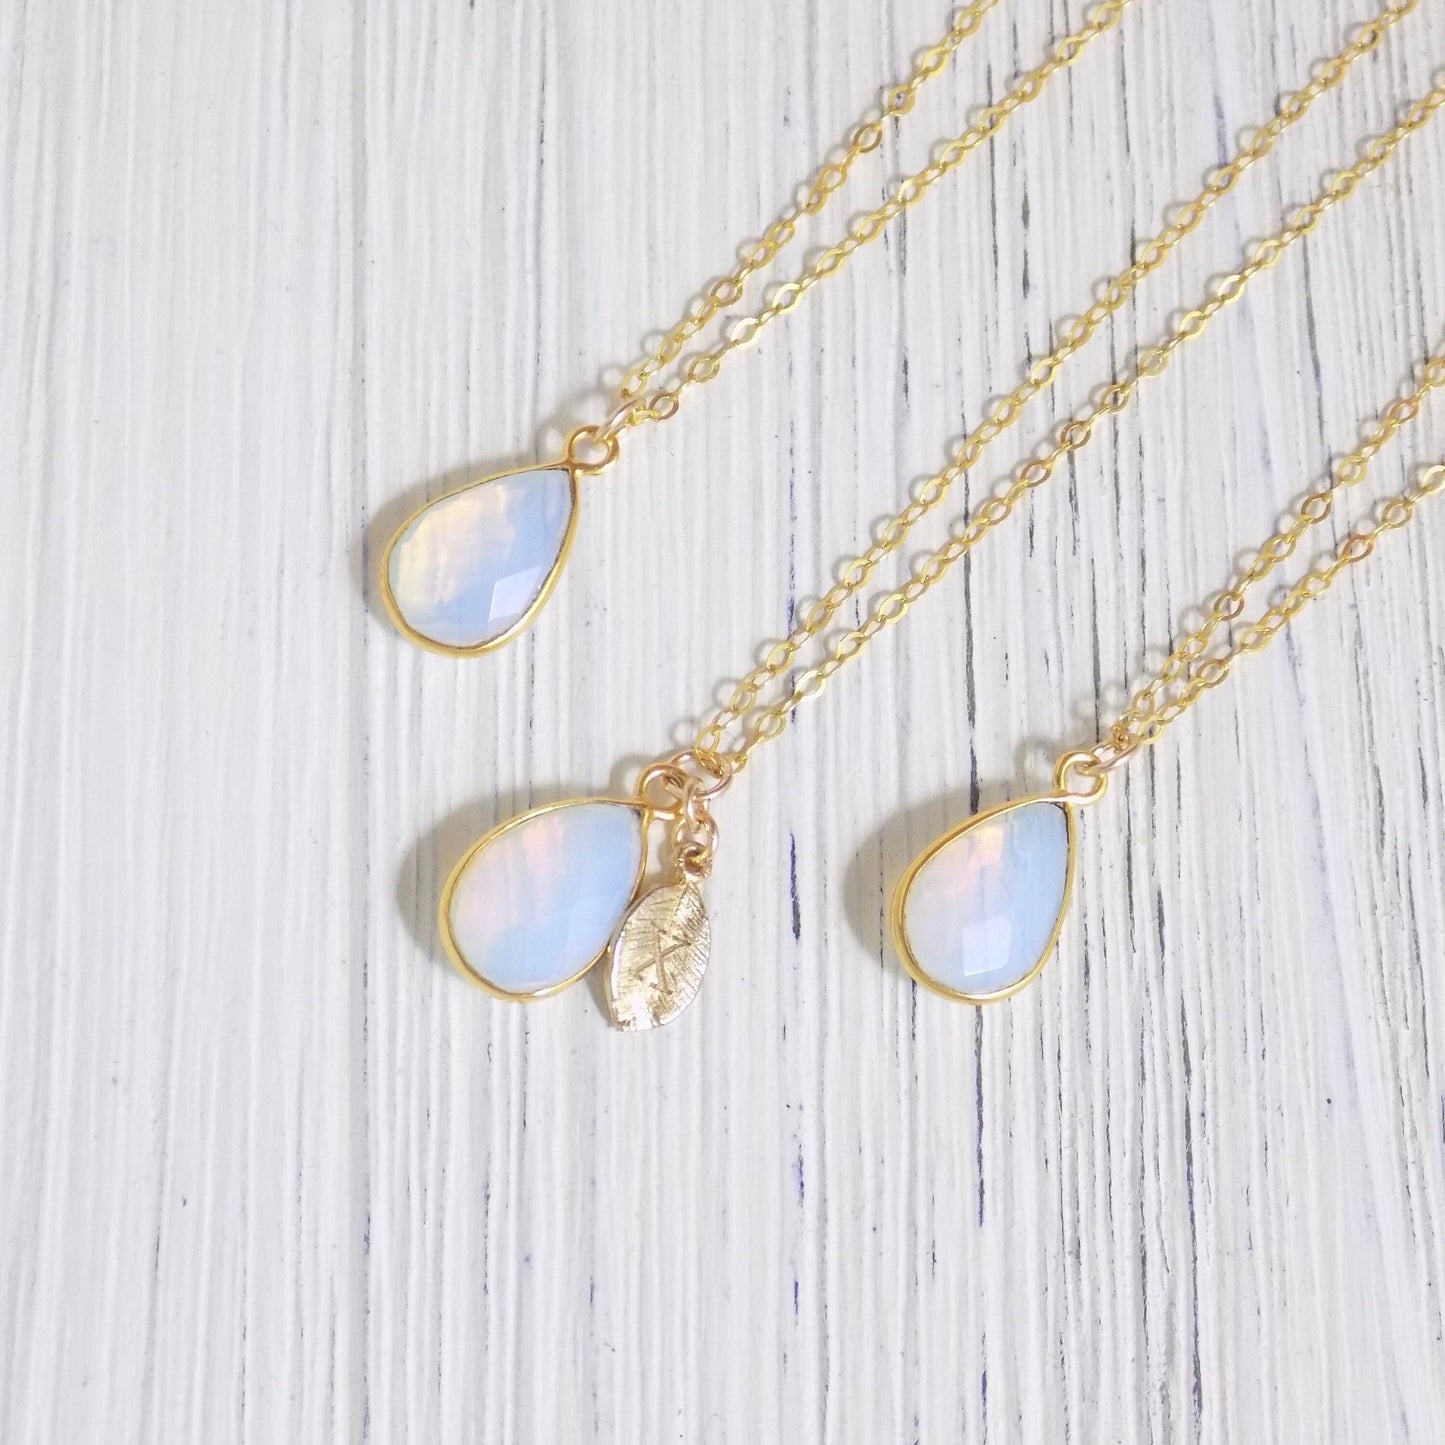 Mothers Day Gift, Opalite Necklace Gold, Personalized Initial, Teardrop Stone Necklace, Opal Jewelry Gifts Mom, Gift For Wife, M4-65